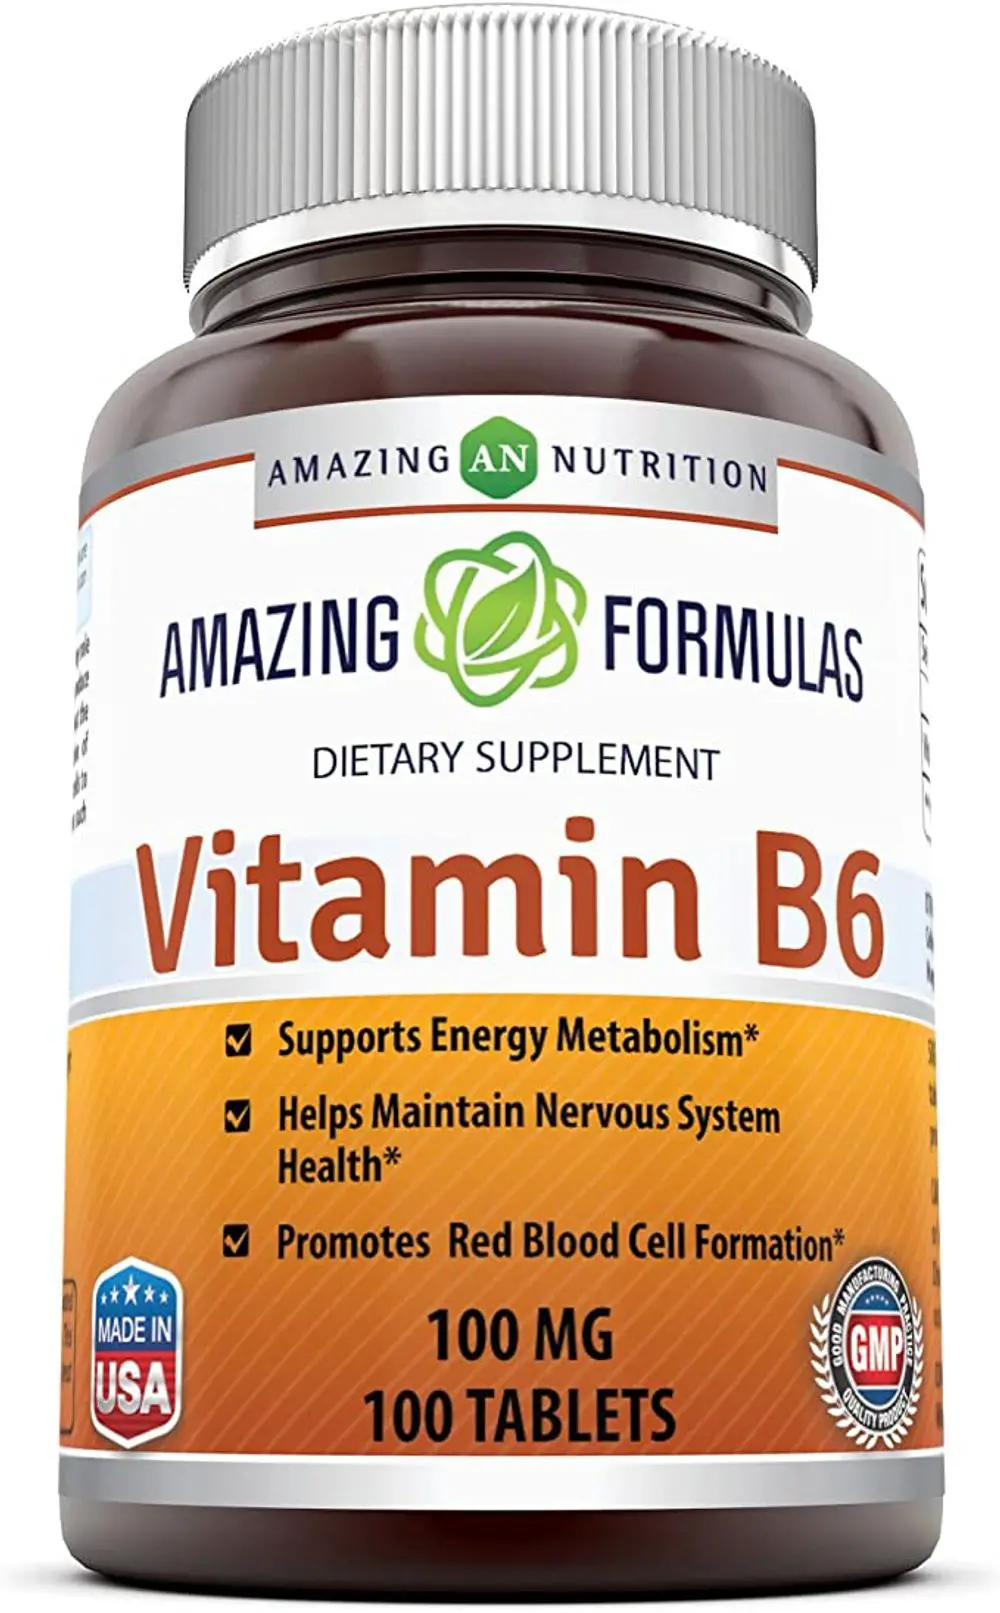 Amazing Nutrition Vitamin B6 Dietary Supplement  100 mg, 100 Tablets ...